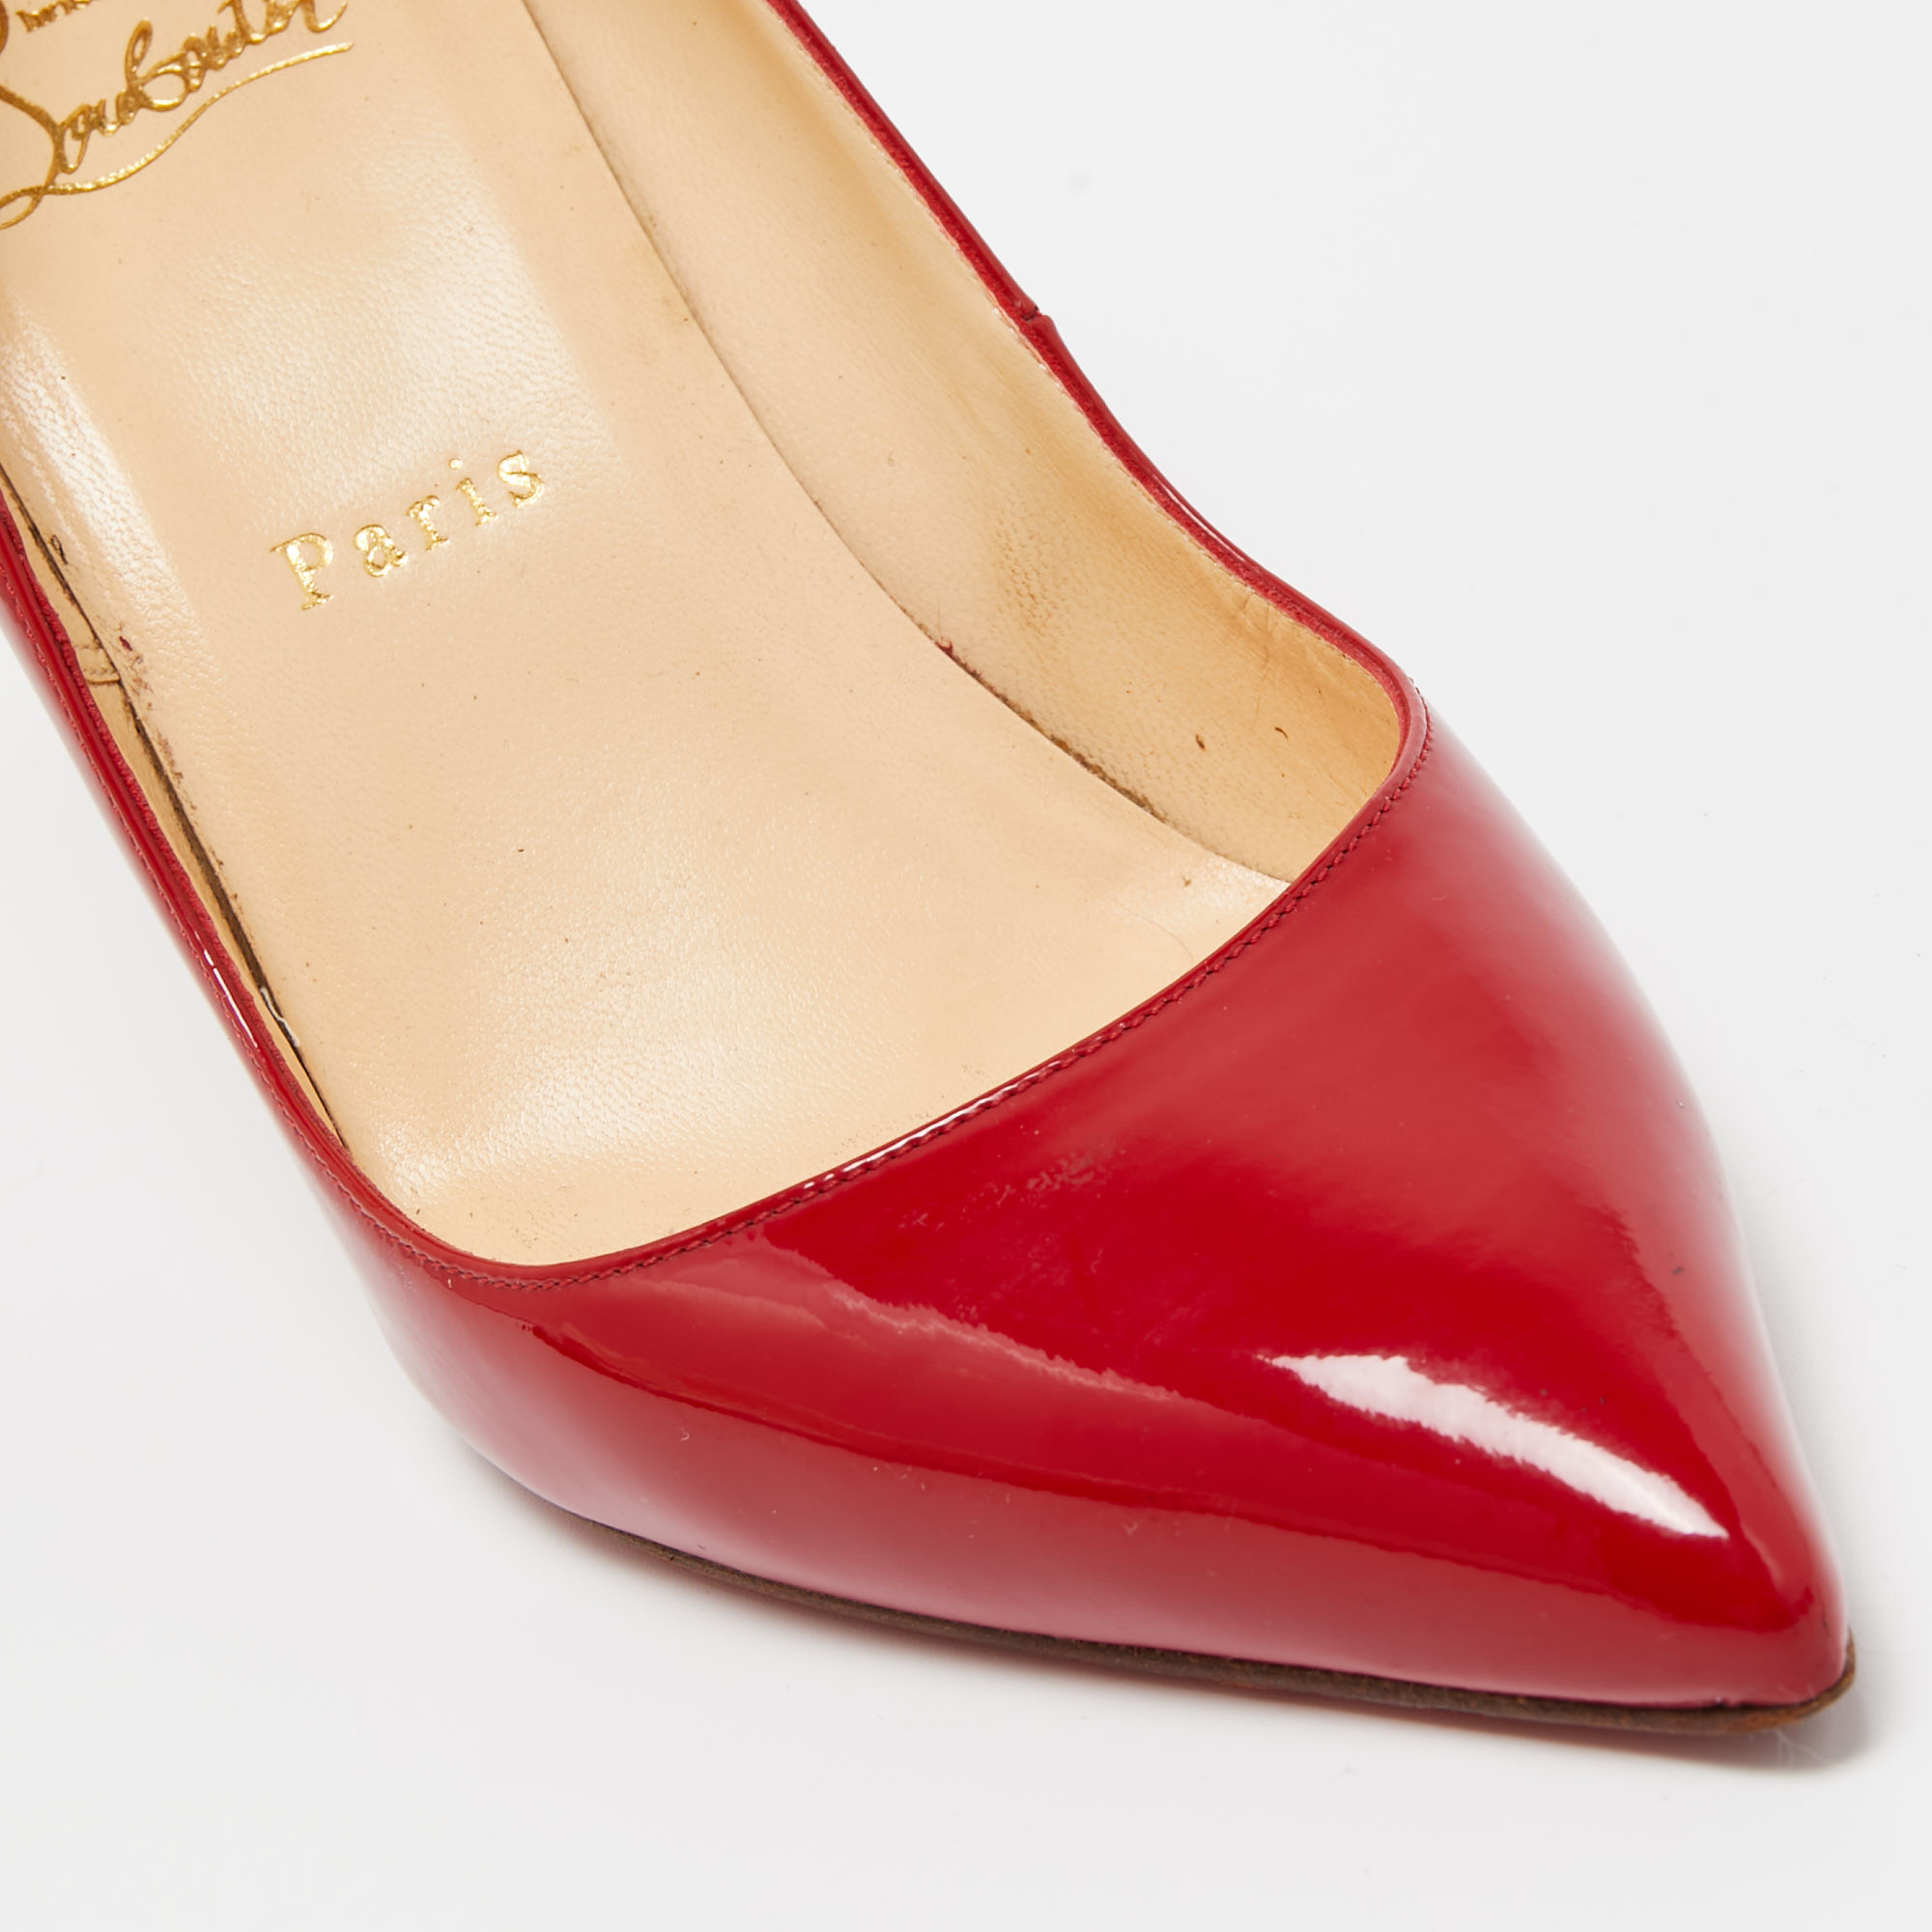 Christian Louboutin Red Patent Leather Pigalle Pointed Toe Pumps Size 38